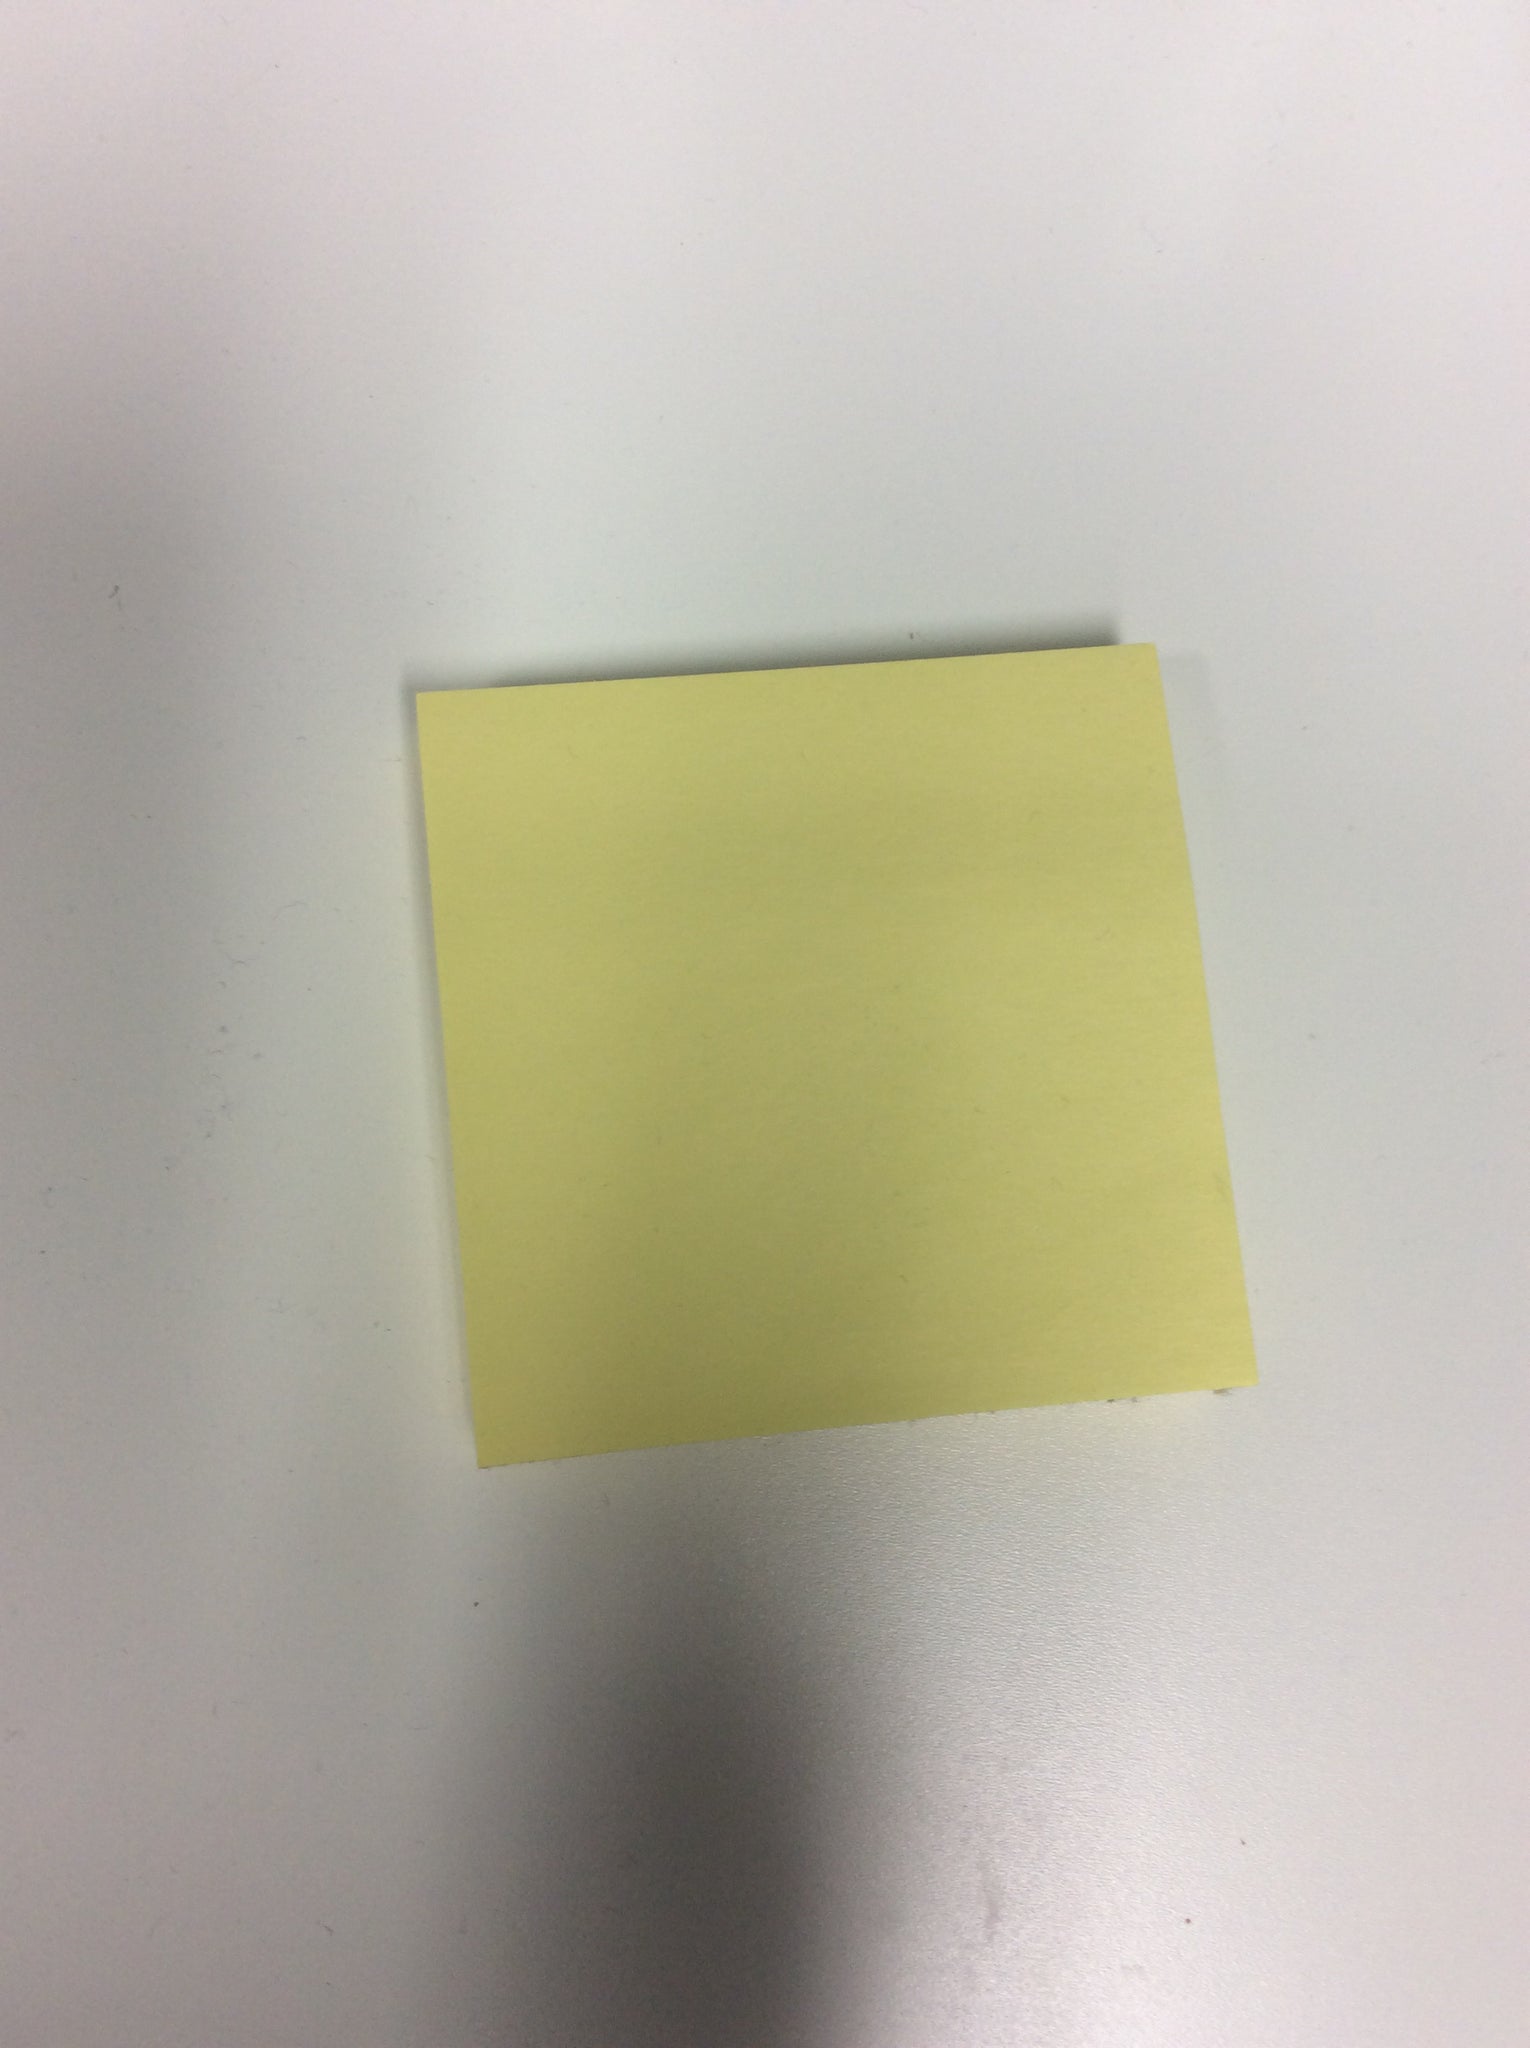 SS - Post-It notes